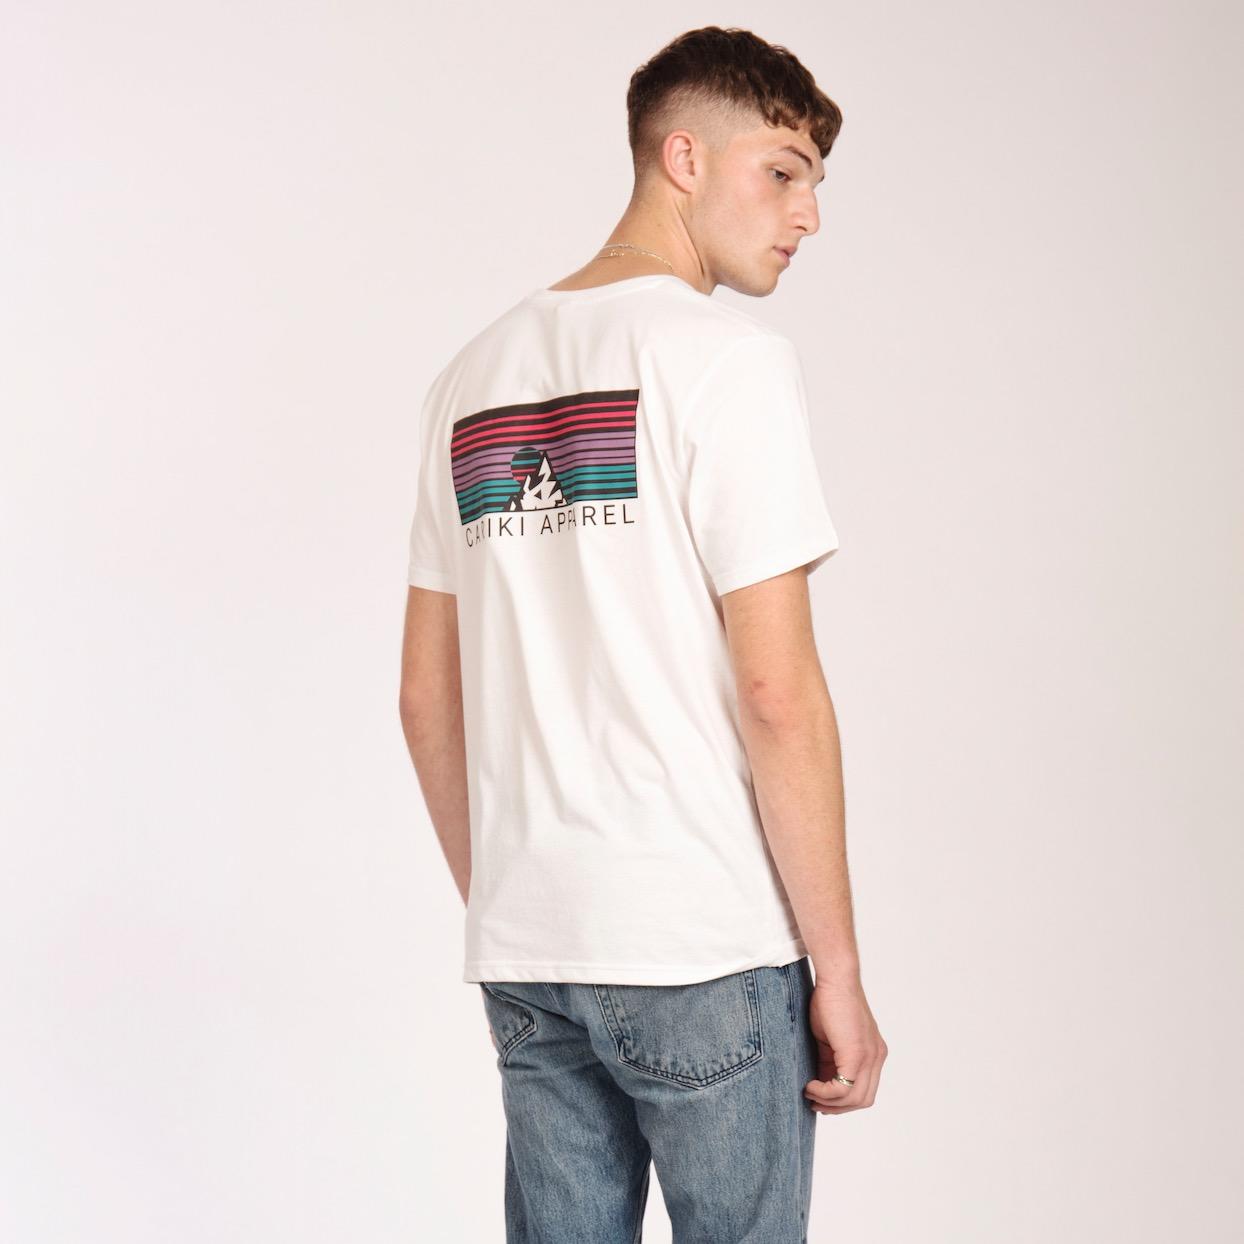 Men's Eco Friendly T Shirt | White Sustainable Cotton Tee For Him